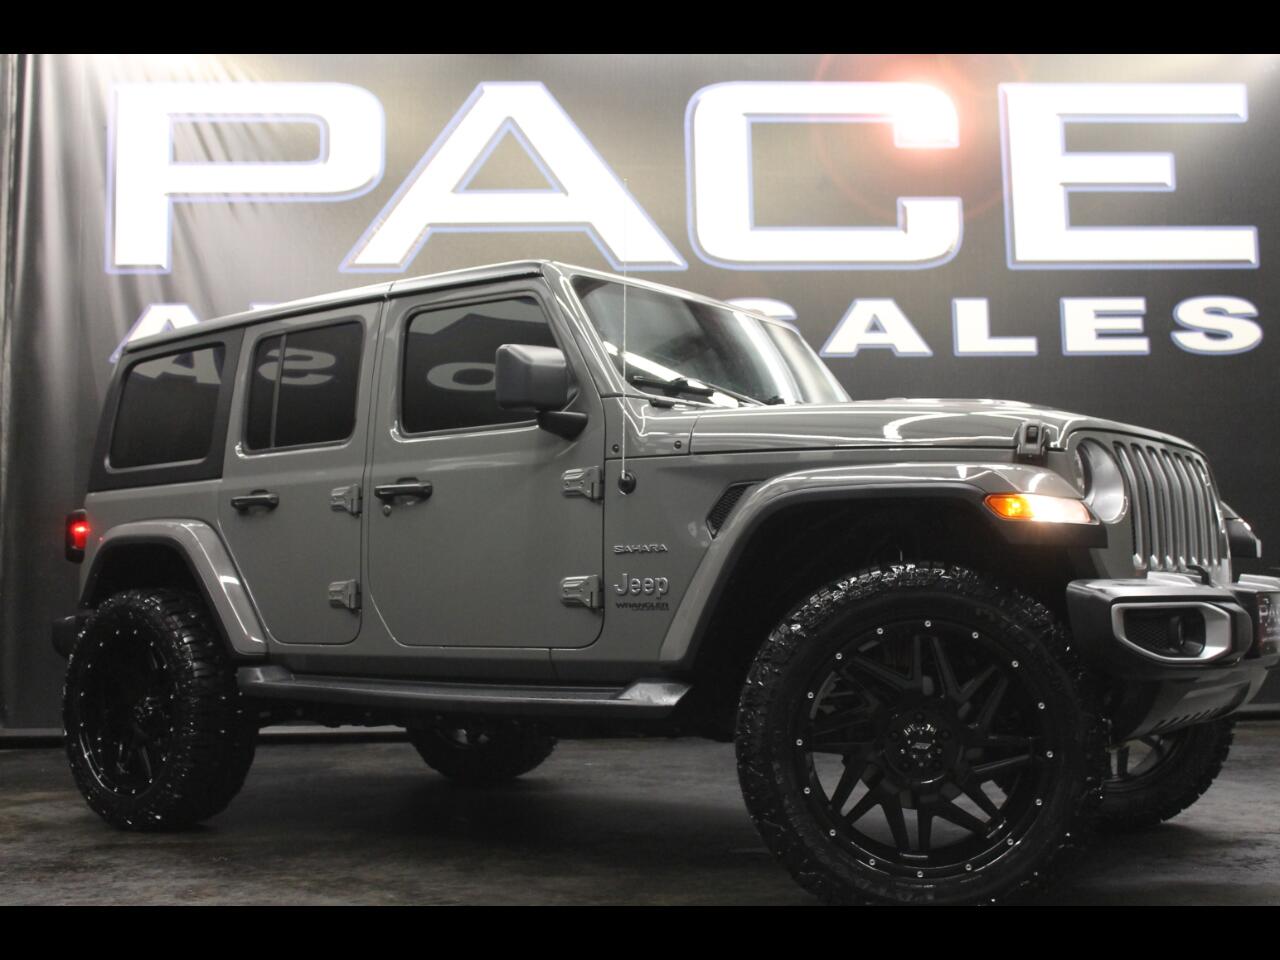 Used 2019 Jeep Wrangler Unlimited Sold in Hattiesburg MS 39402 Pace Auto  Sales